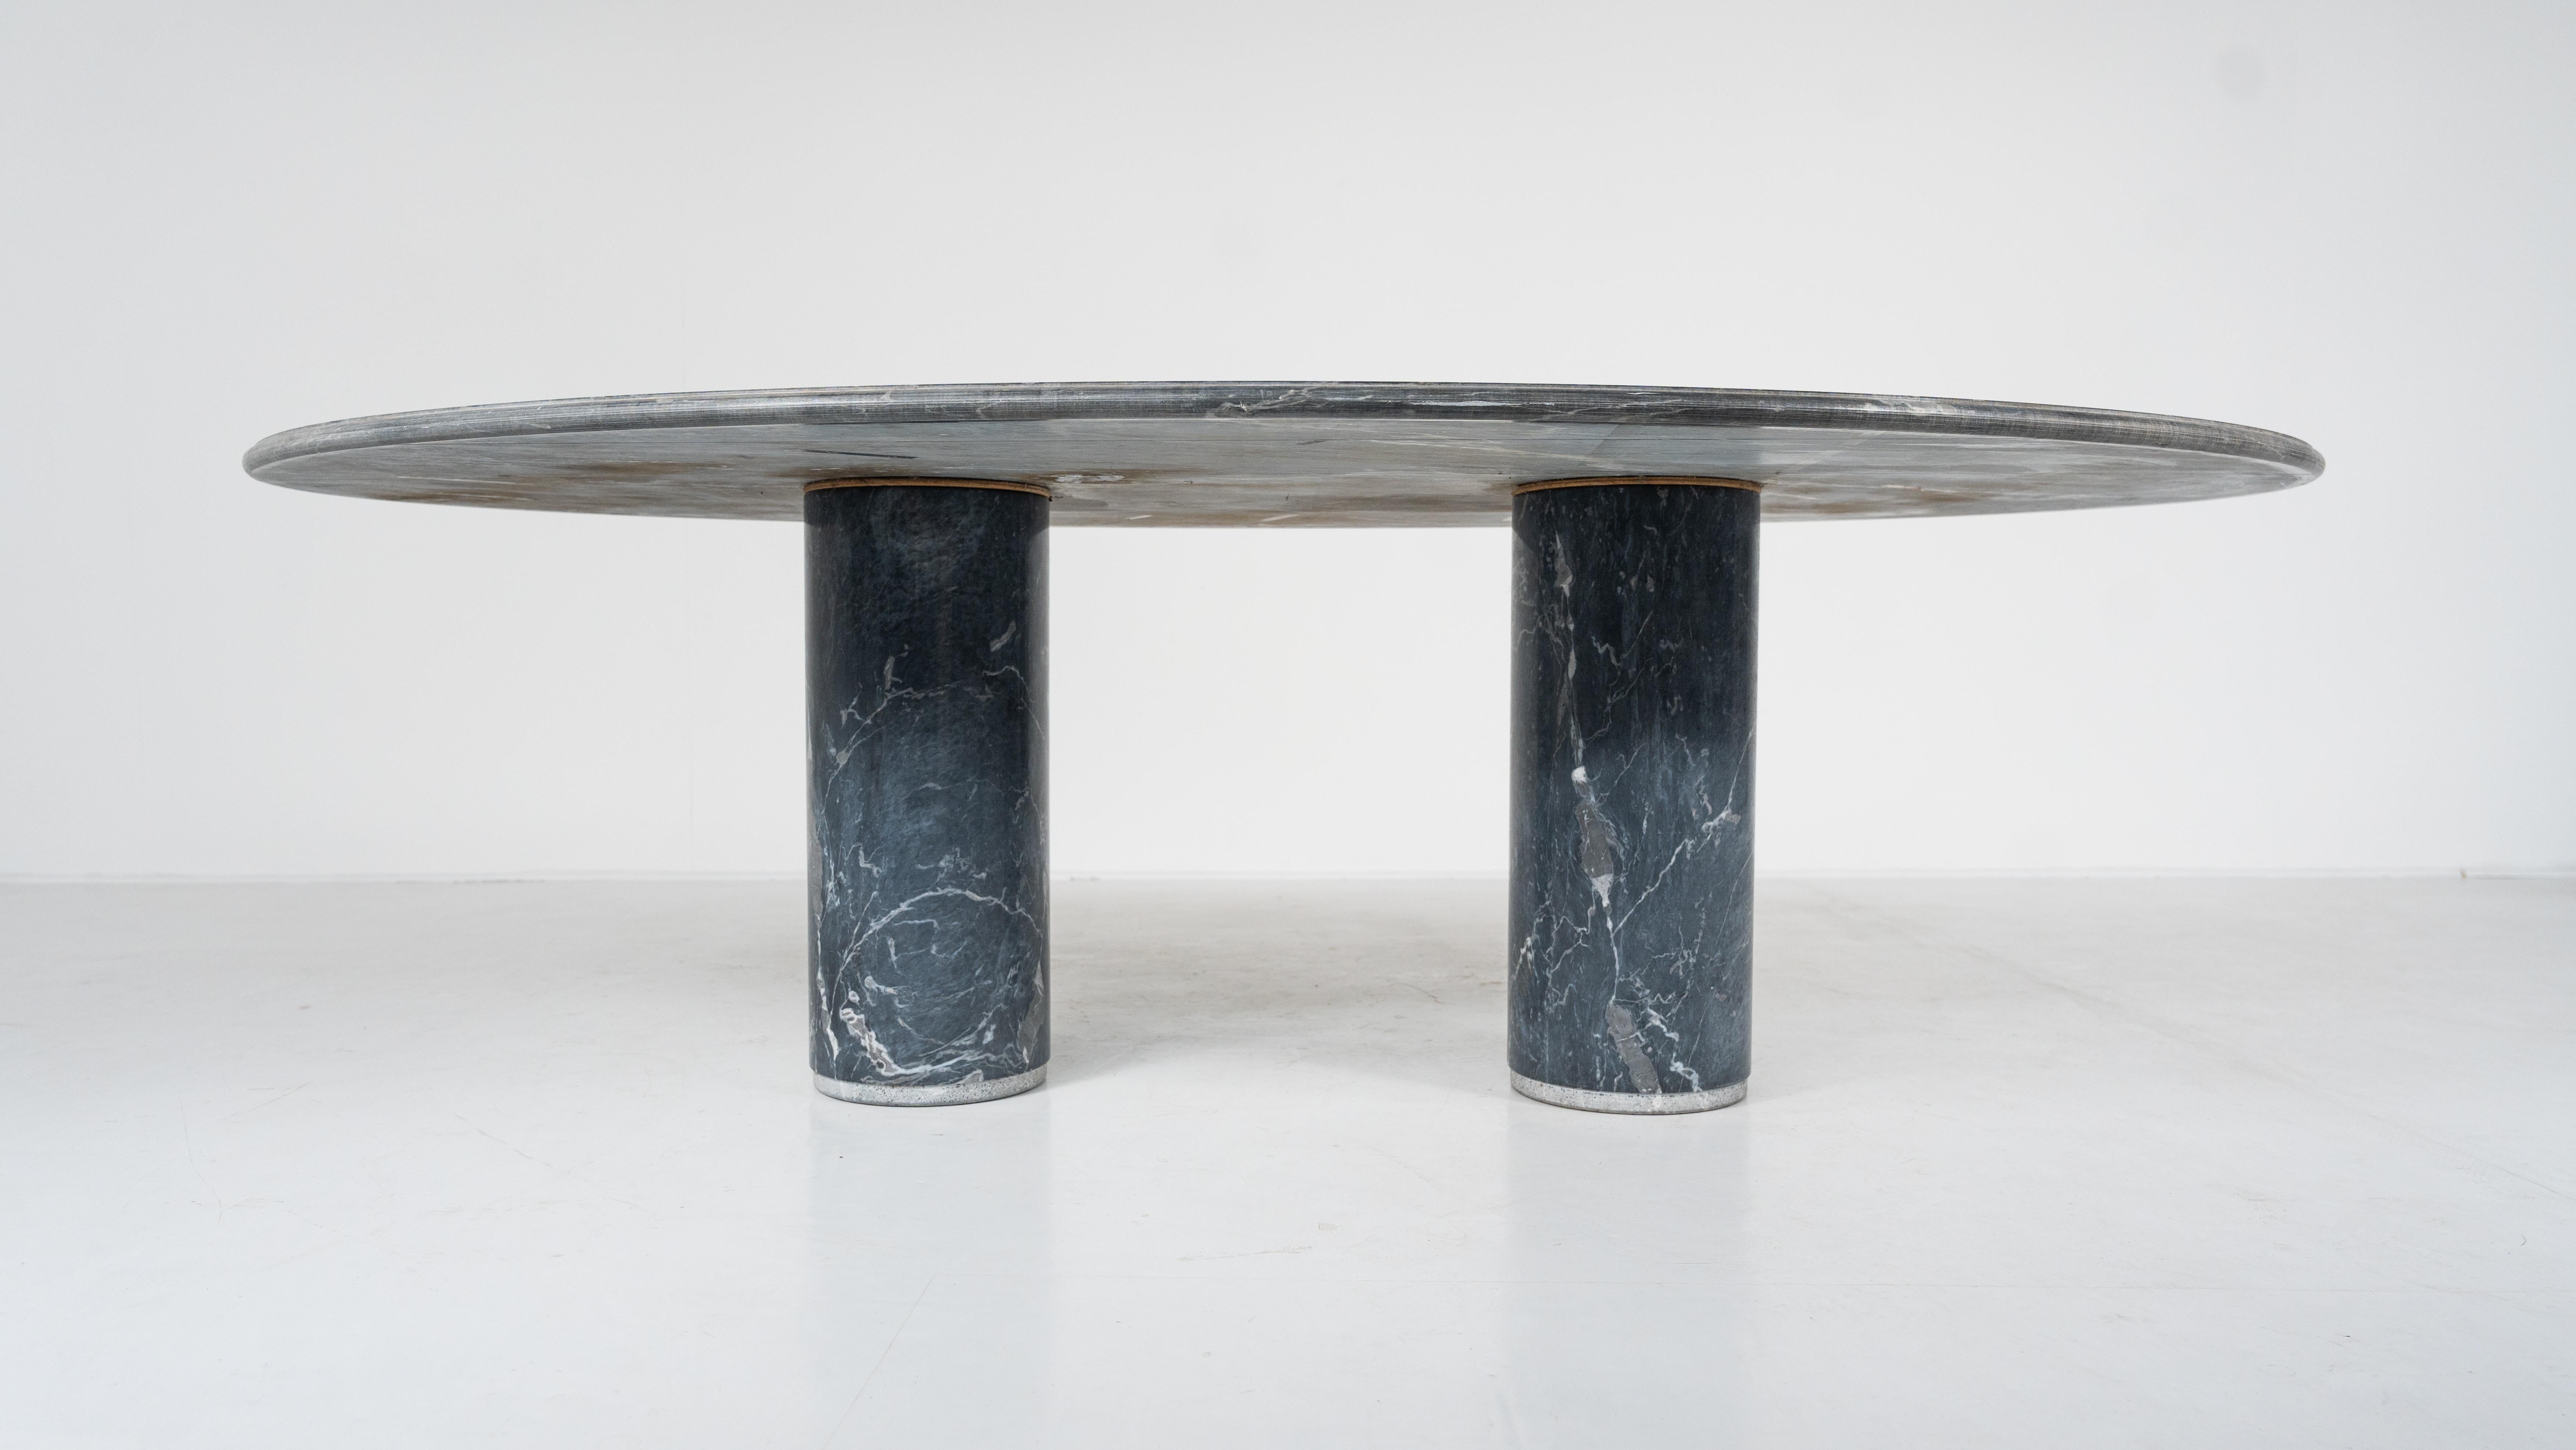 Ovale del Giardiniere Table by Achille Castiglioni for Upgroup, Marble, 1980s For Sale 6